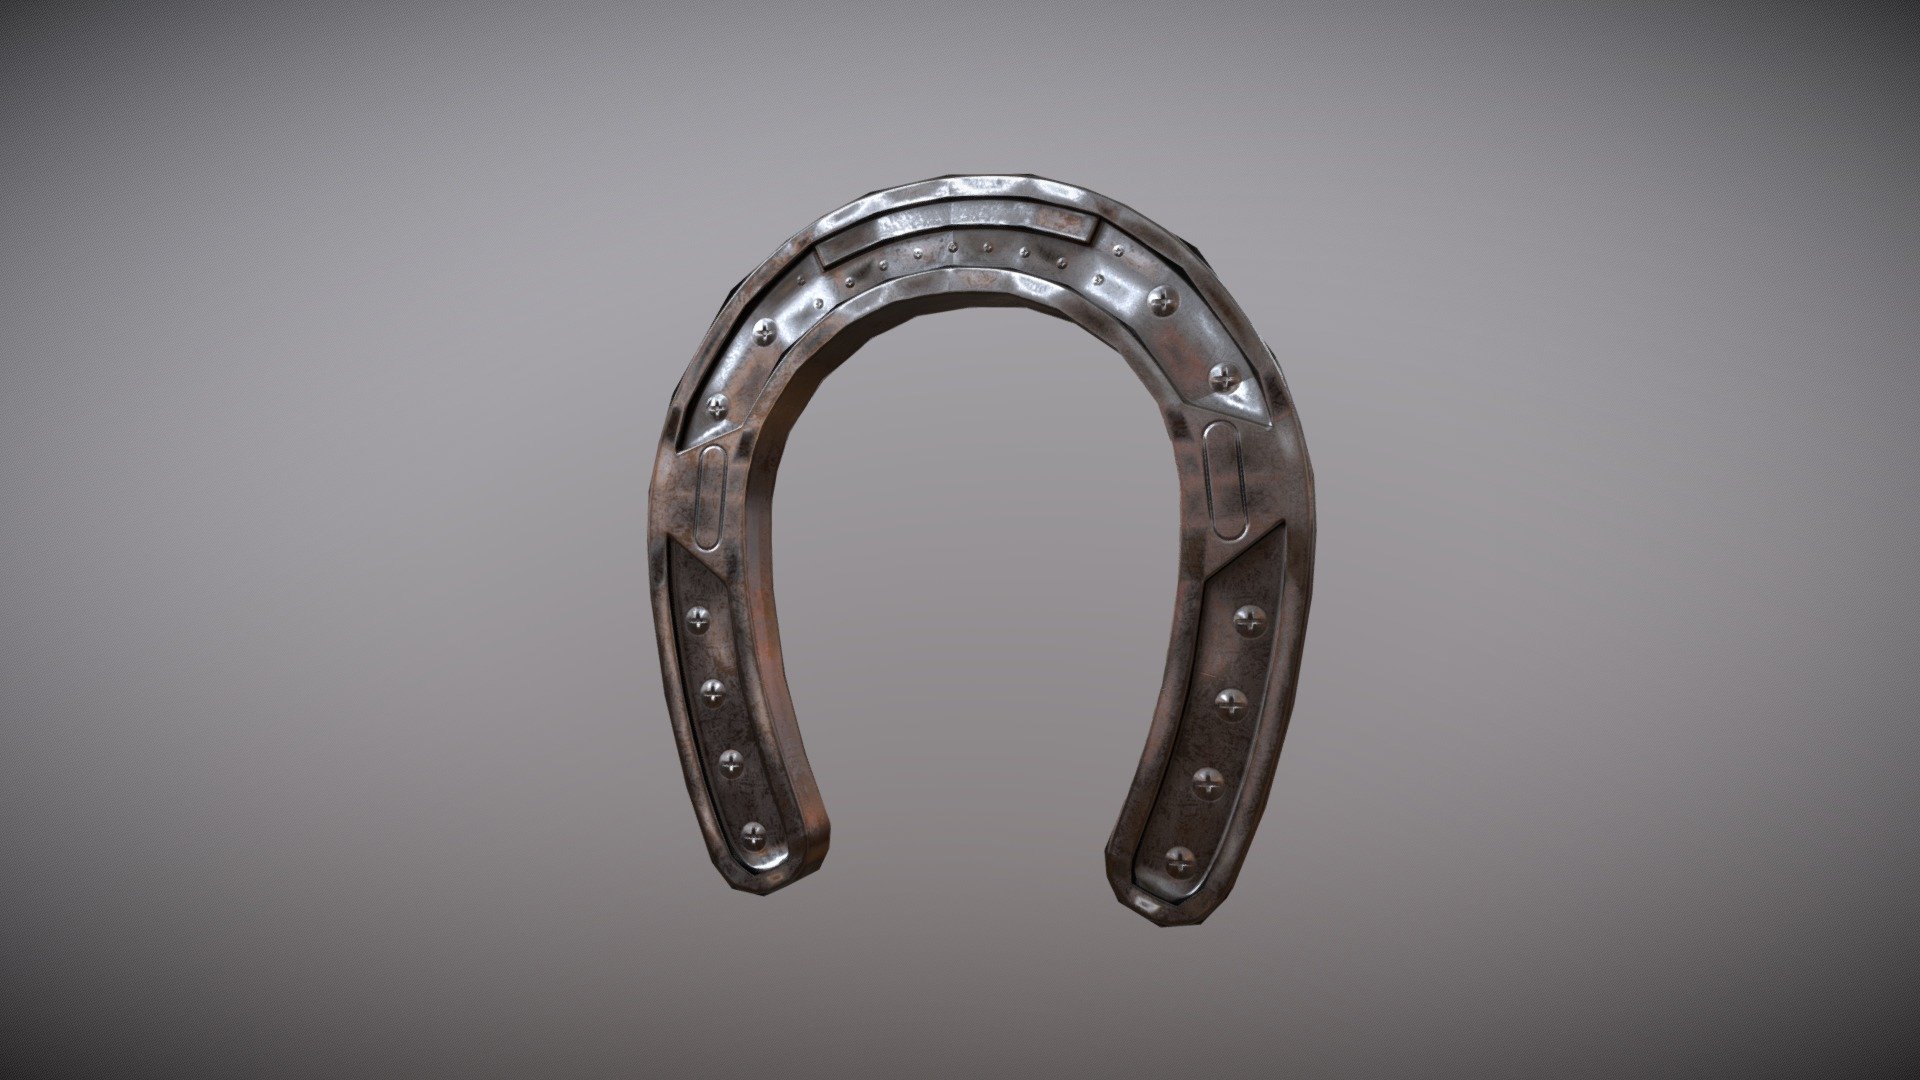 3D low-poly model of Horseshoe

Horse shoes. This is a very important element for a horse so that its bones on its legs do not wear out.

PBR 1k texture set with AO. Low-poly count as well. Can be used anywhere you need 3d model